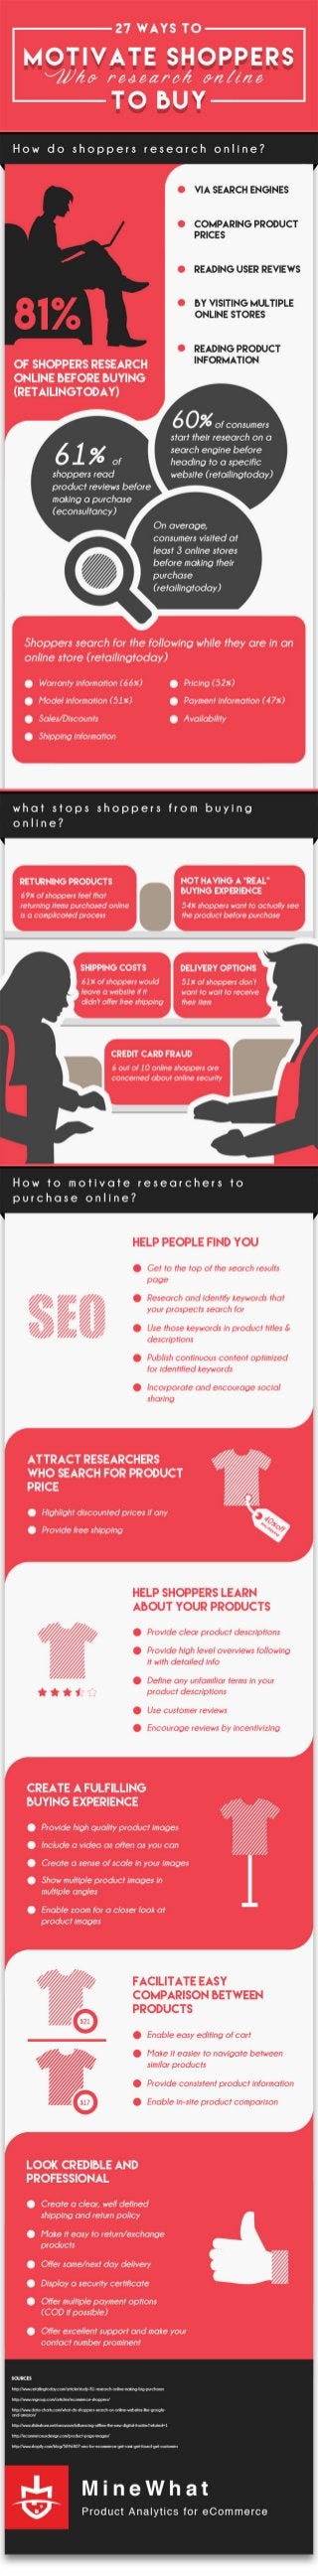 Infographic: MOTIVATE SHOPPERS who research online TO BUY